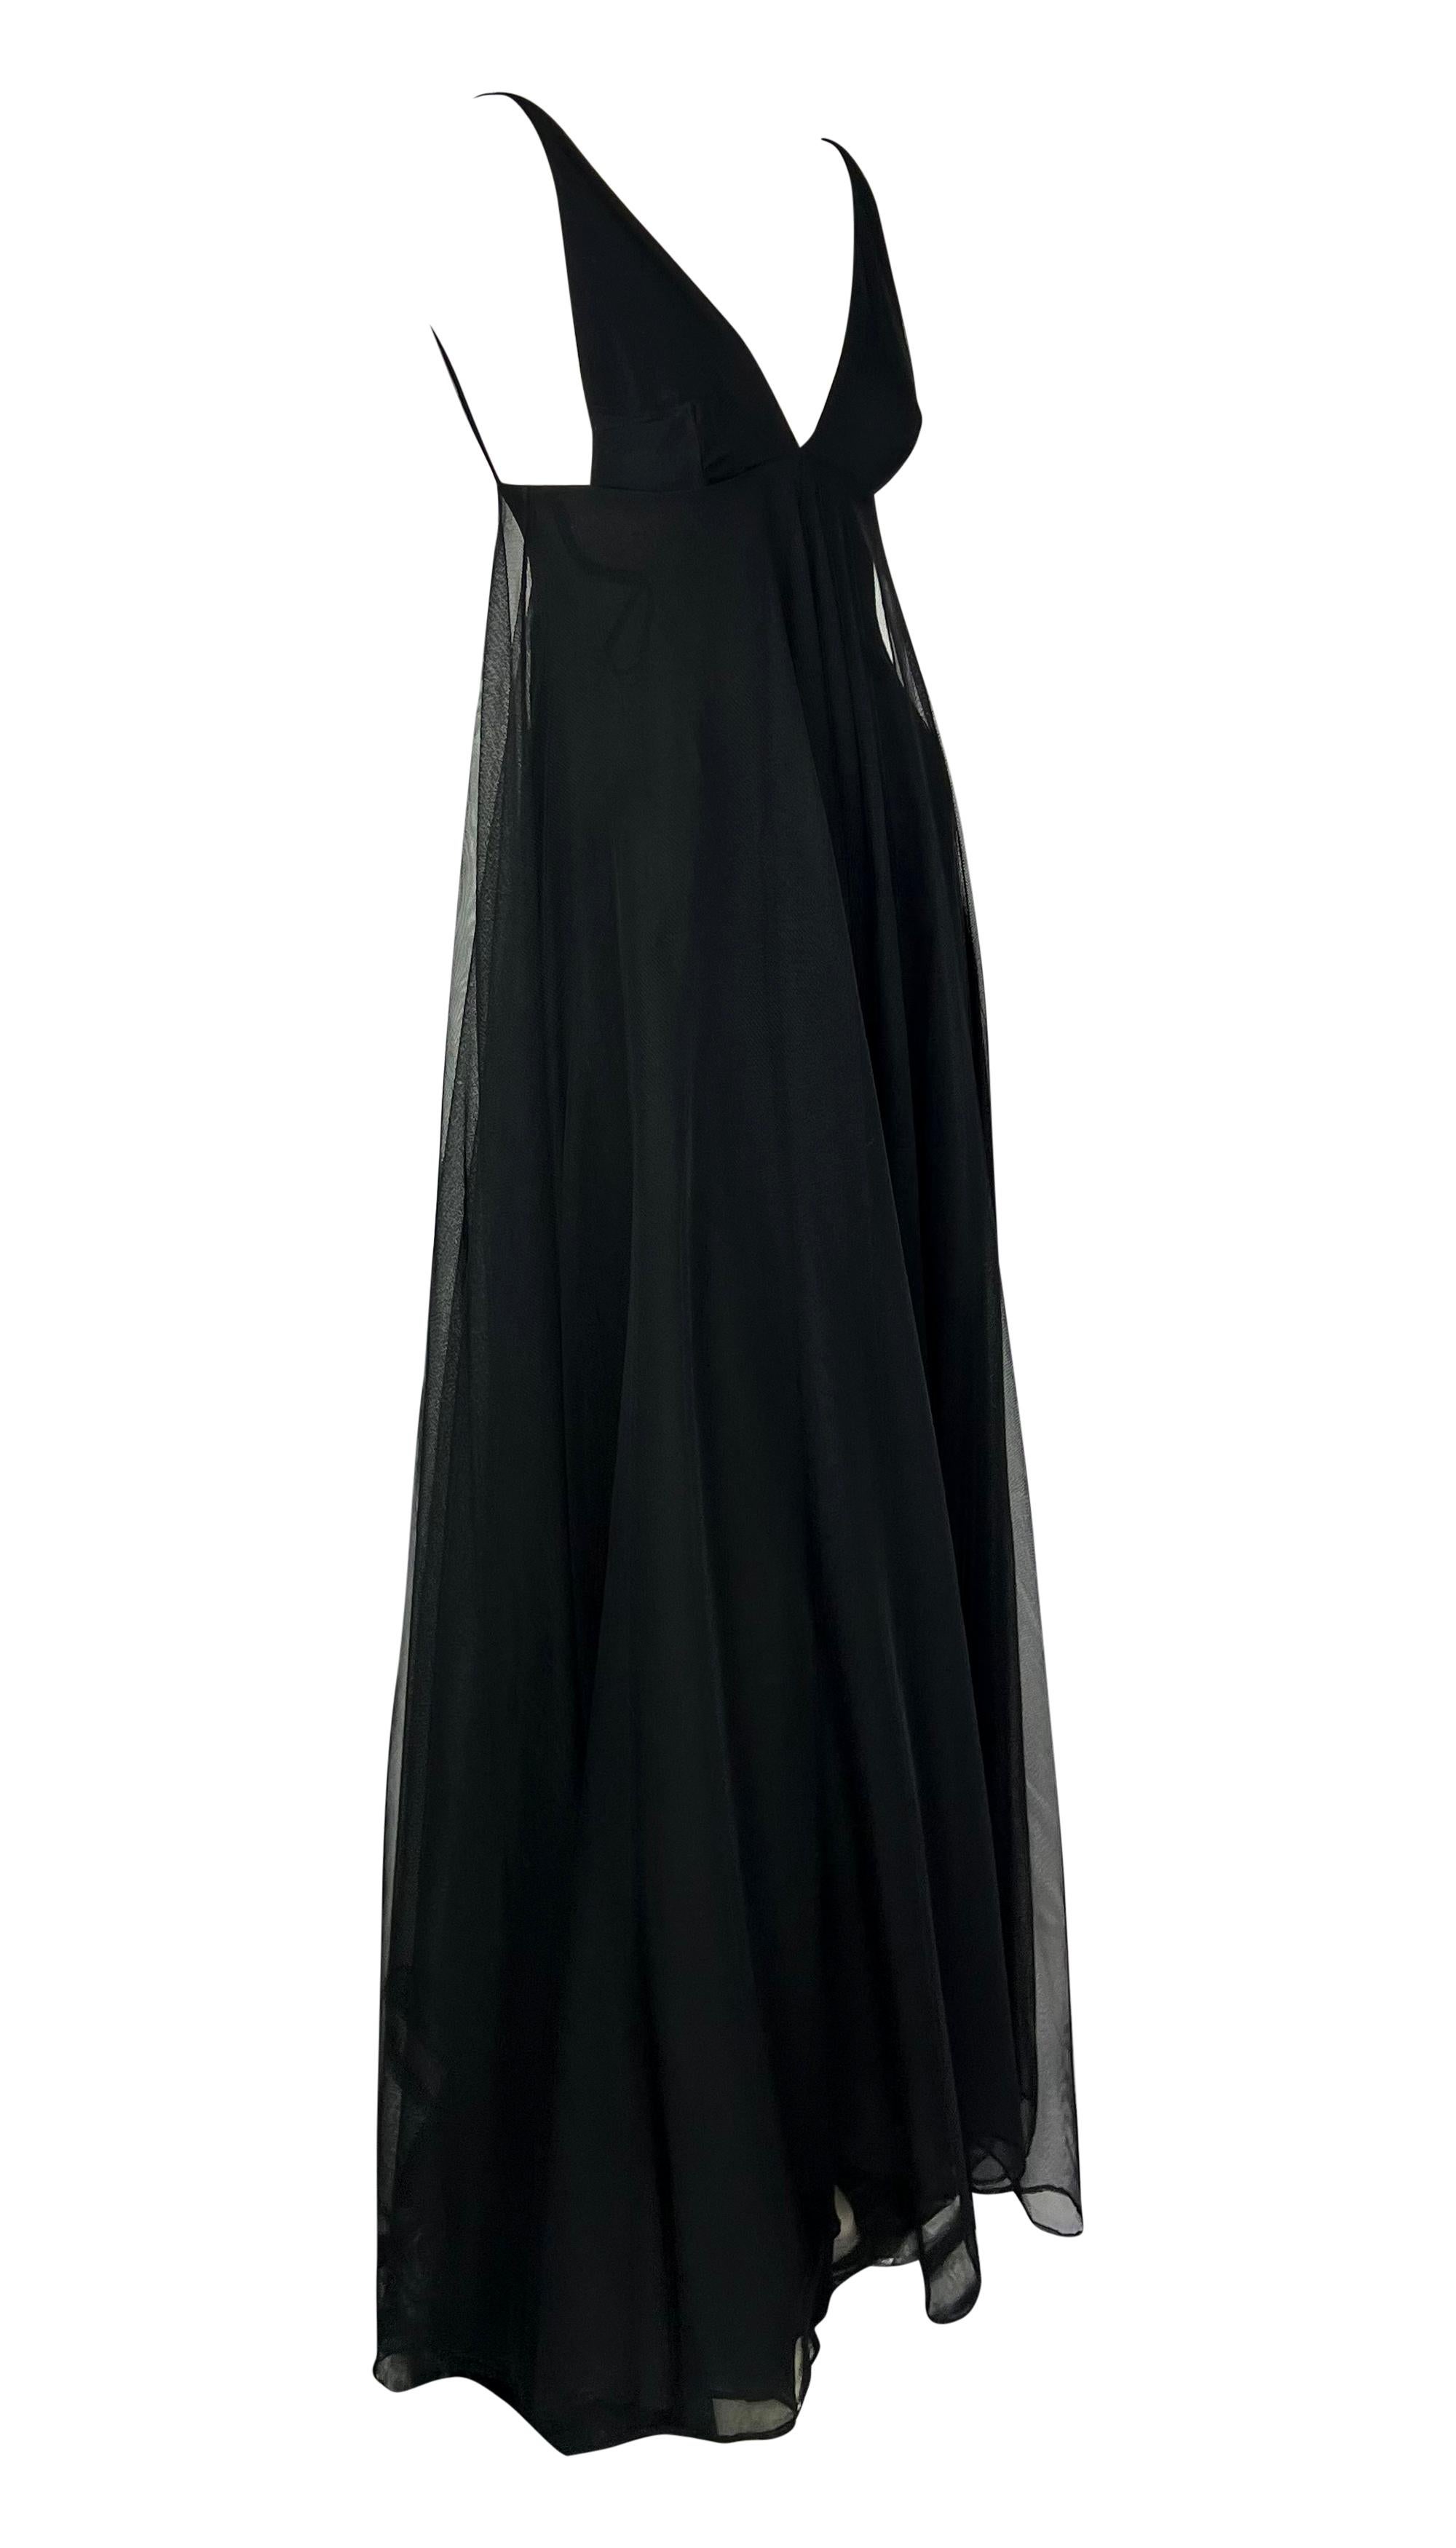 F/W 1998 Gucci by Tom Ford Runway Black Layered Tulle Sheer Plunge Gown For Sale 7